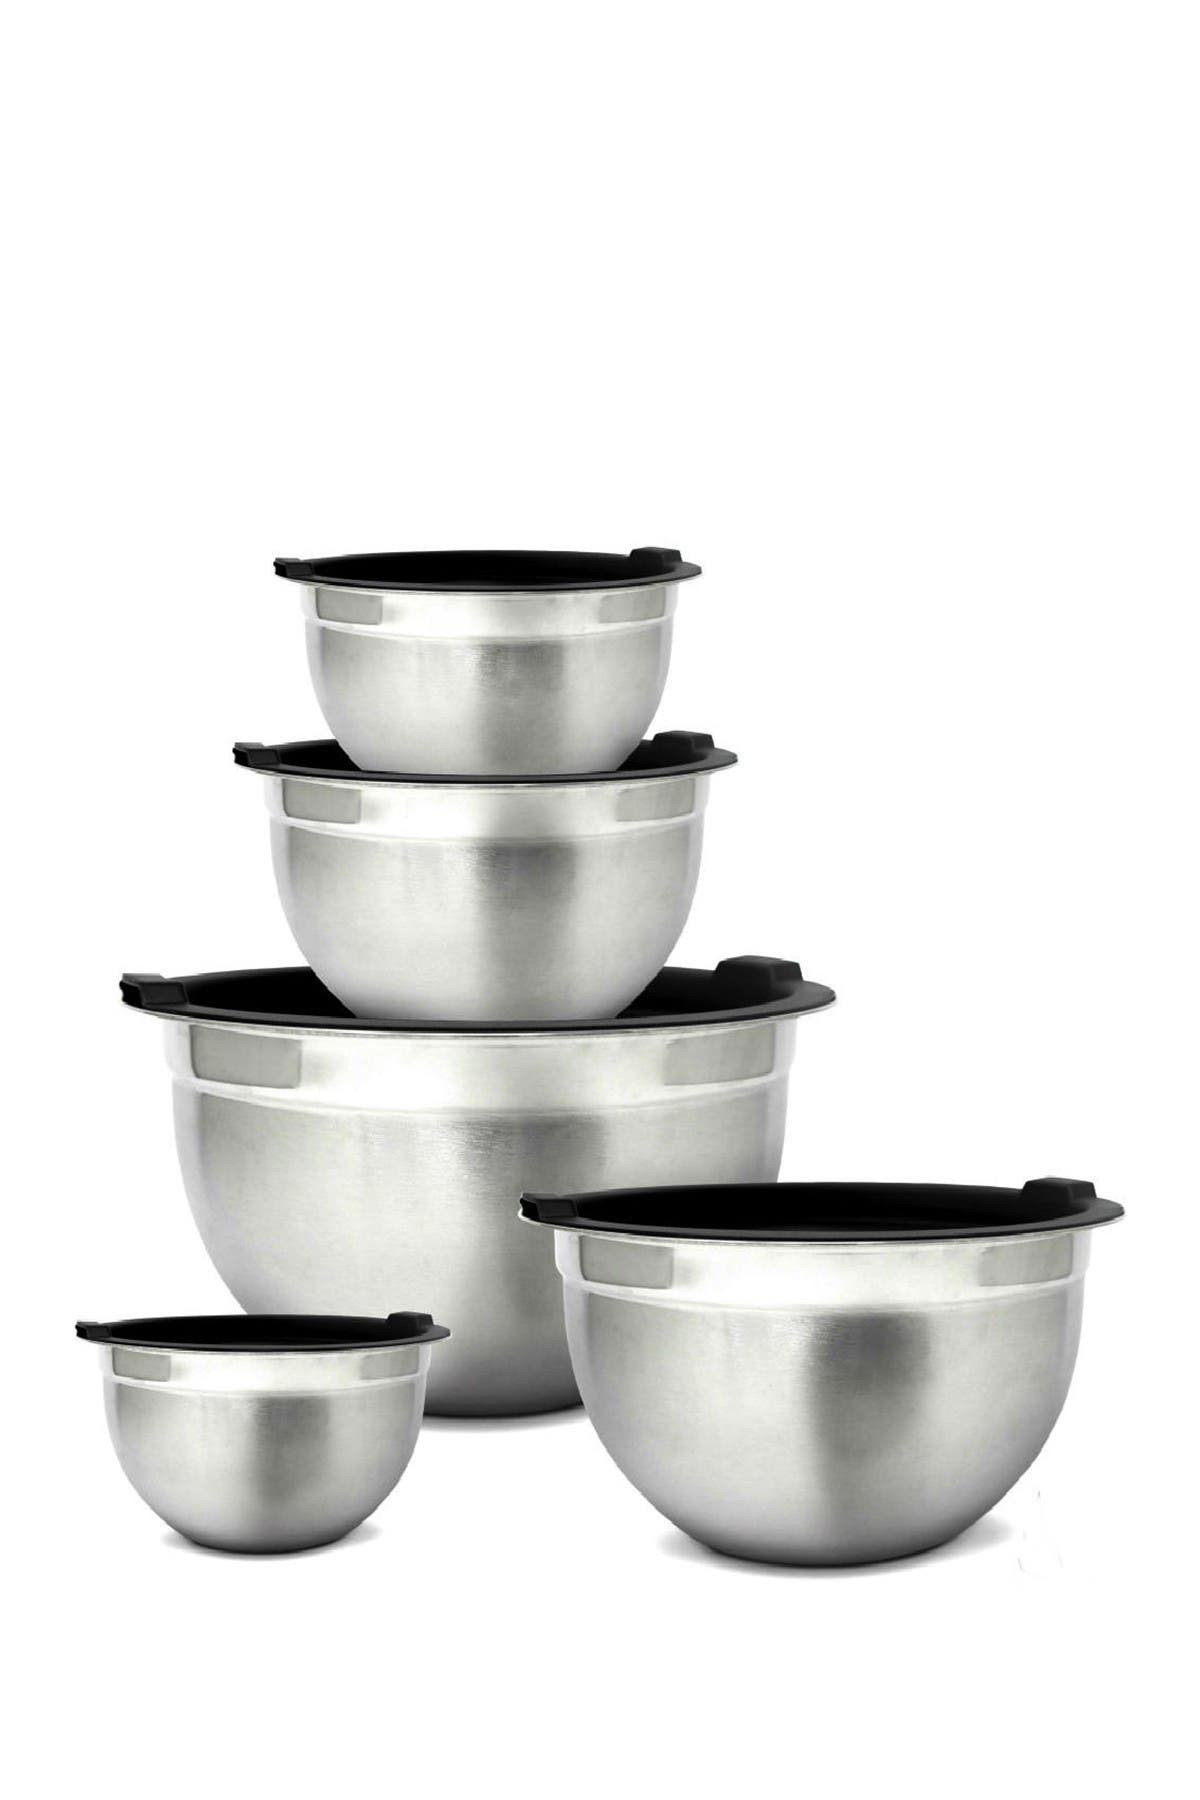 Homikit Stainless Steel Salad Bowls with Airtight Lids Set of 5 Mixing Bowl –